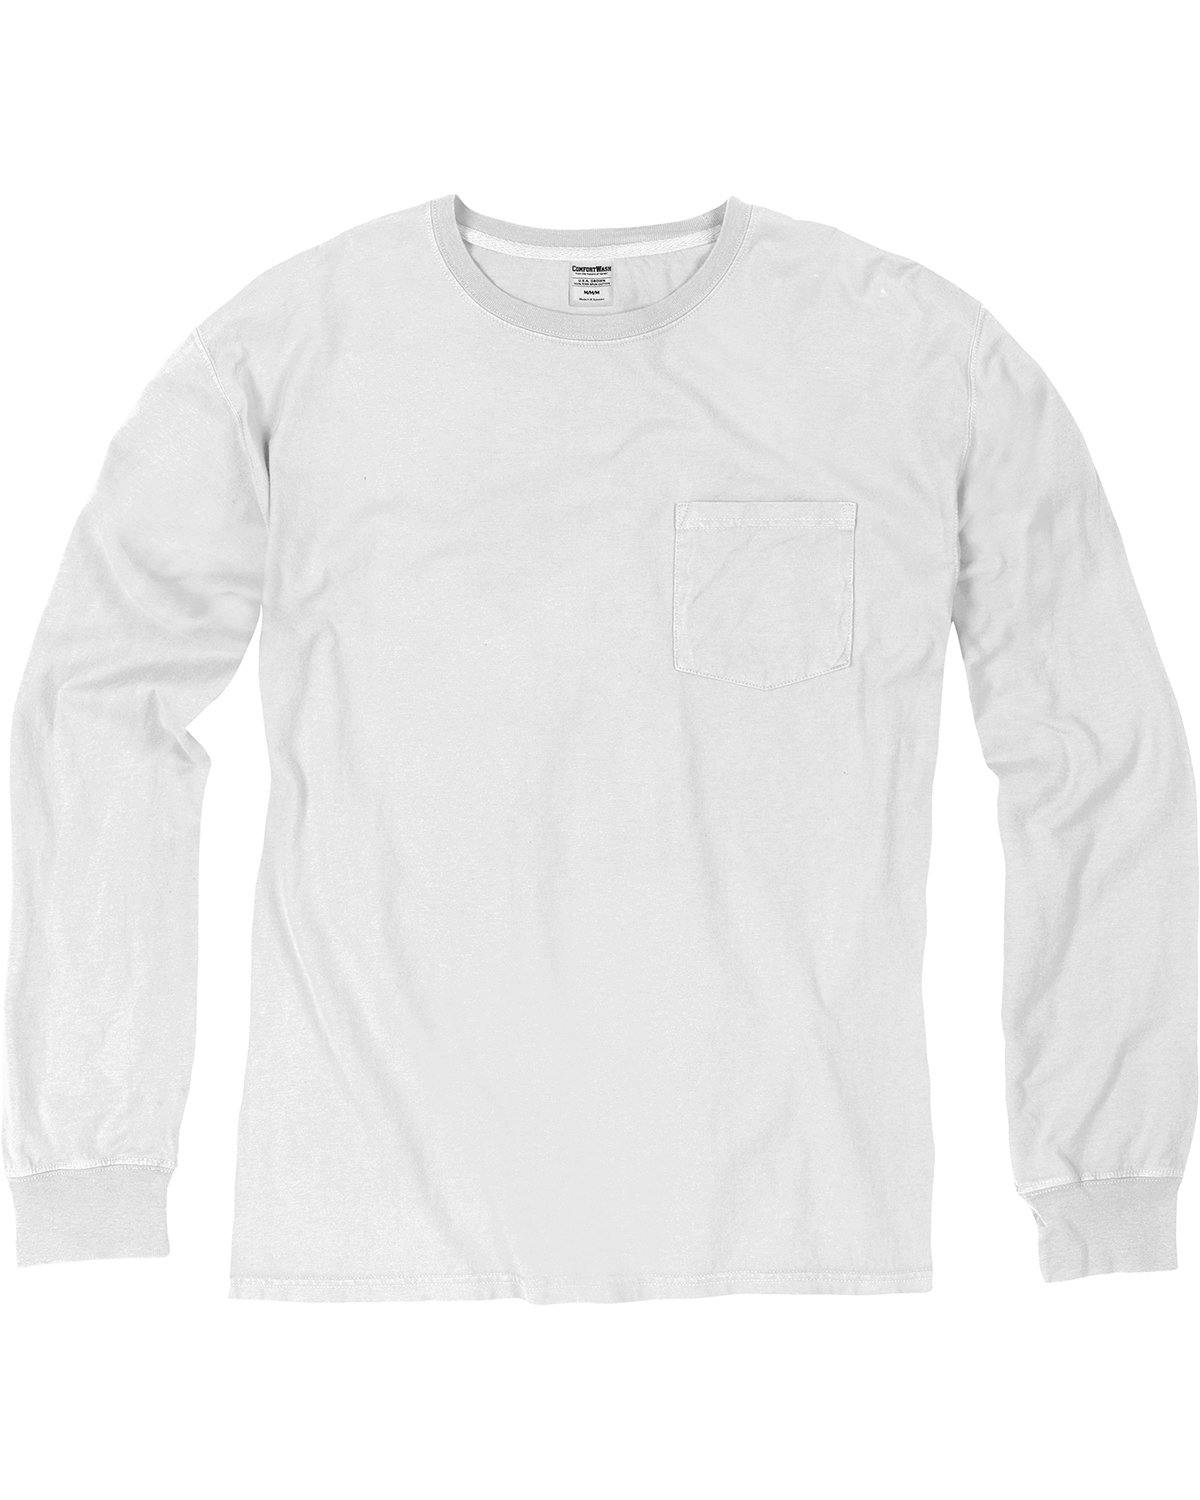 Image for Unisex Garment-Dyed Long-Sleeve T-Shirt with Pocket